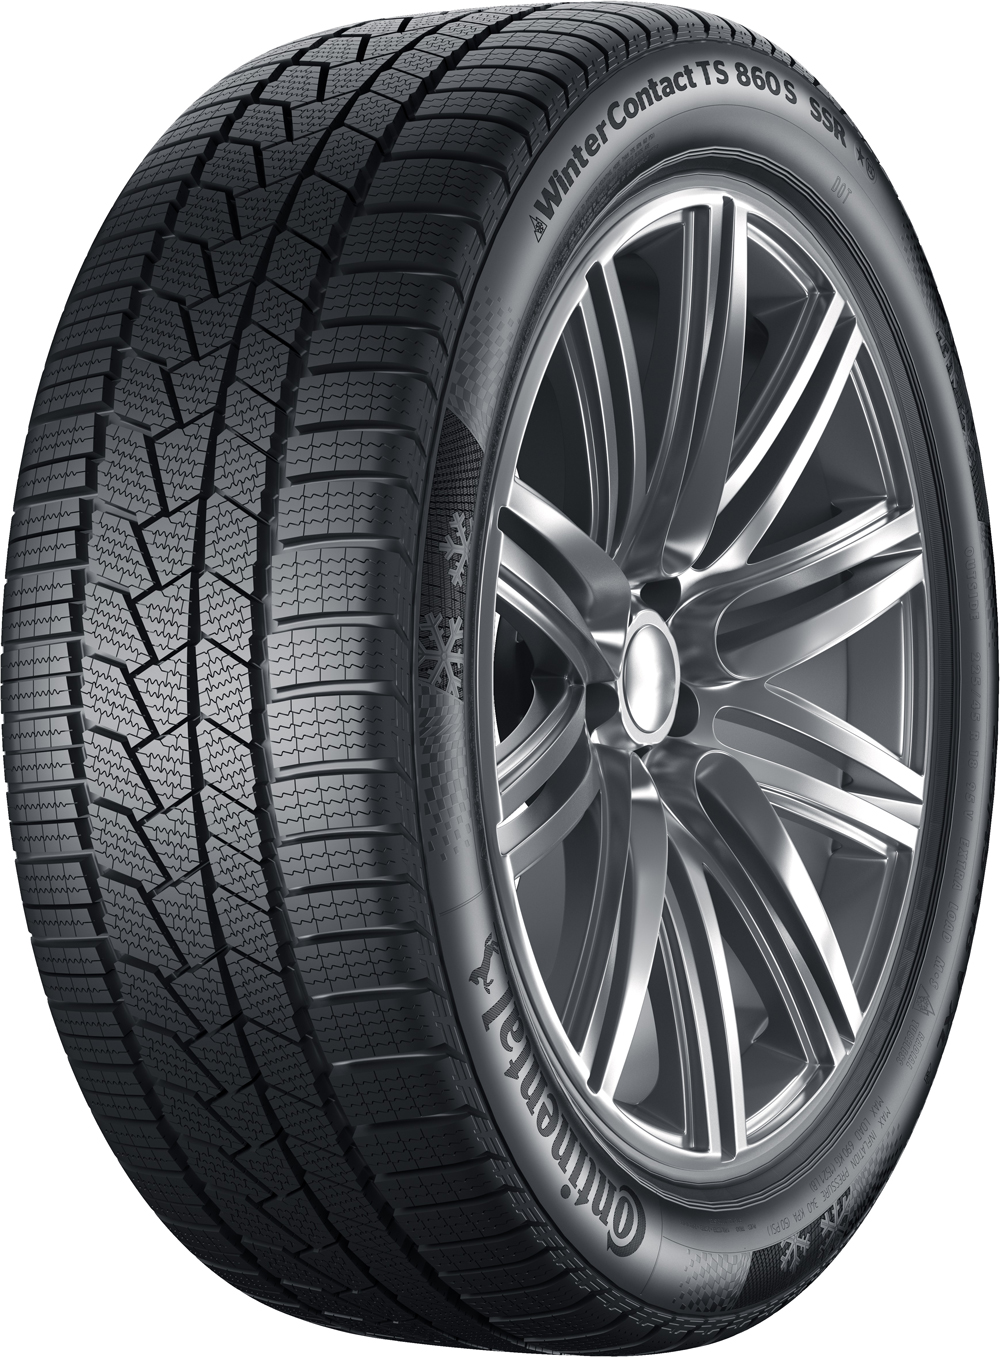 Anvelope auto CONTINENTAL WinterContact TS 860 S SSR XL RFT 275/35 R20 102V